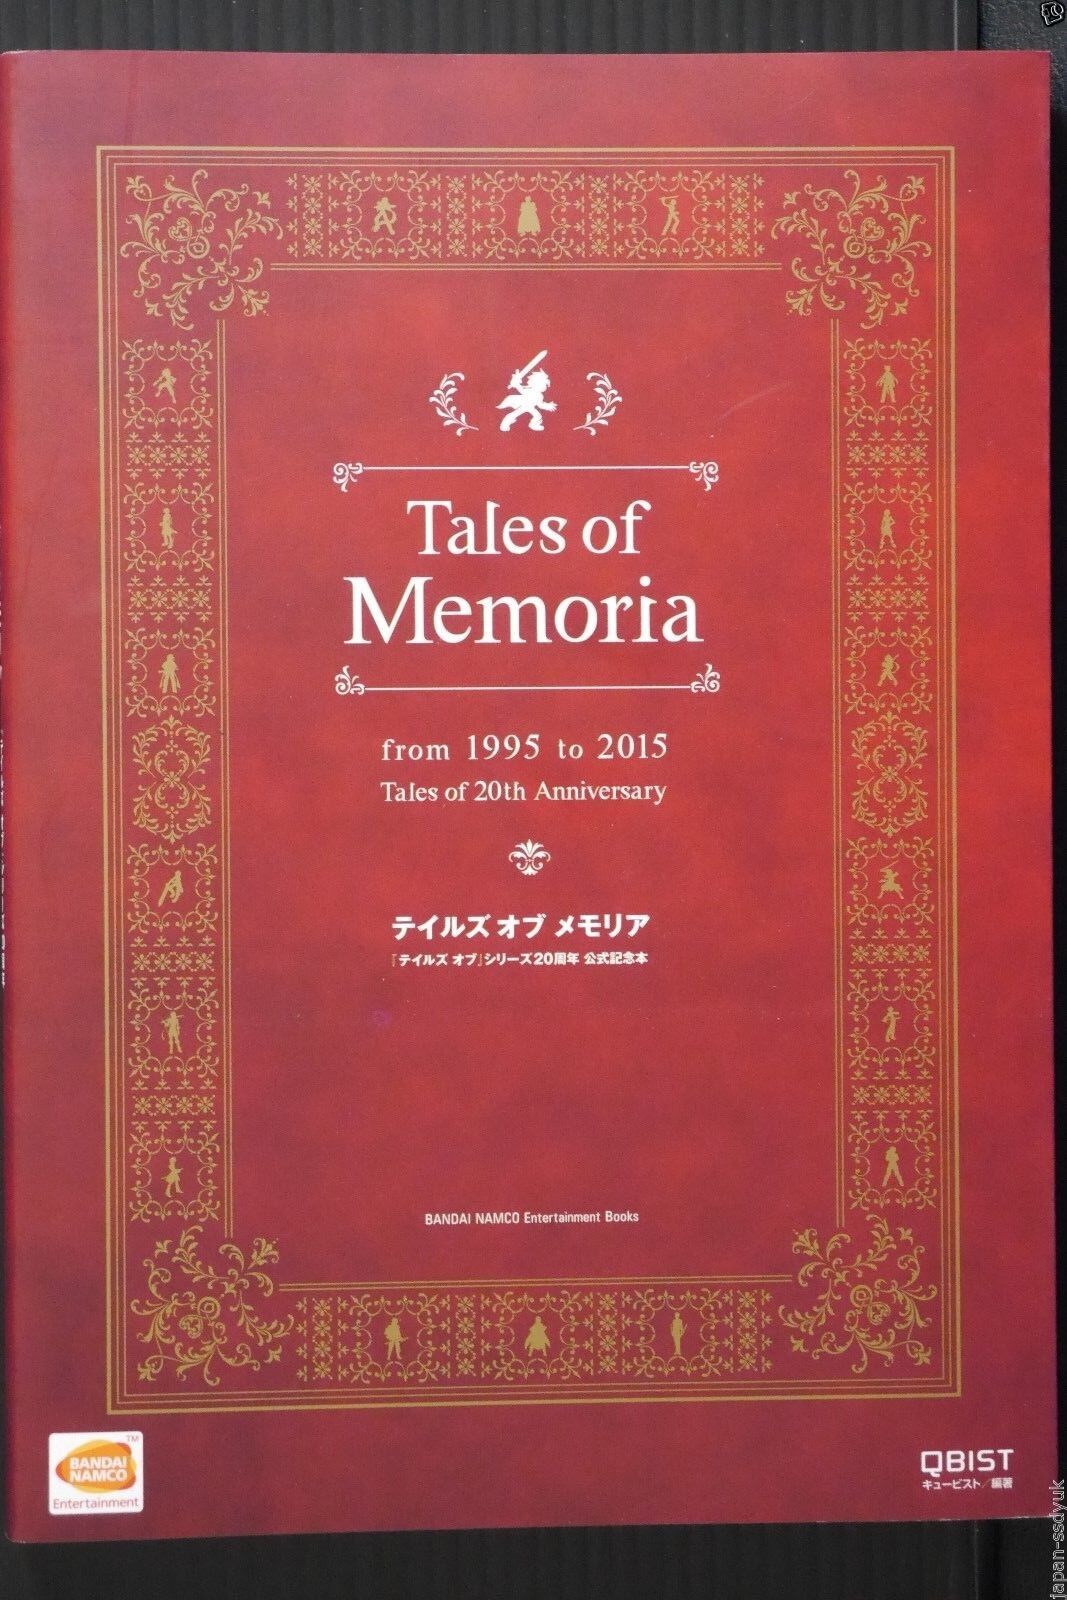 Tales of 20th Anniversary Book: From 1995 to 2015 \'Tales of Memoria\' from Japan